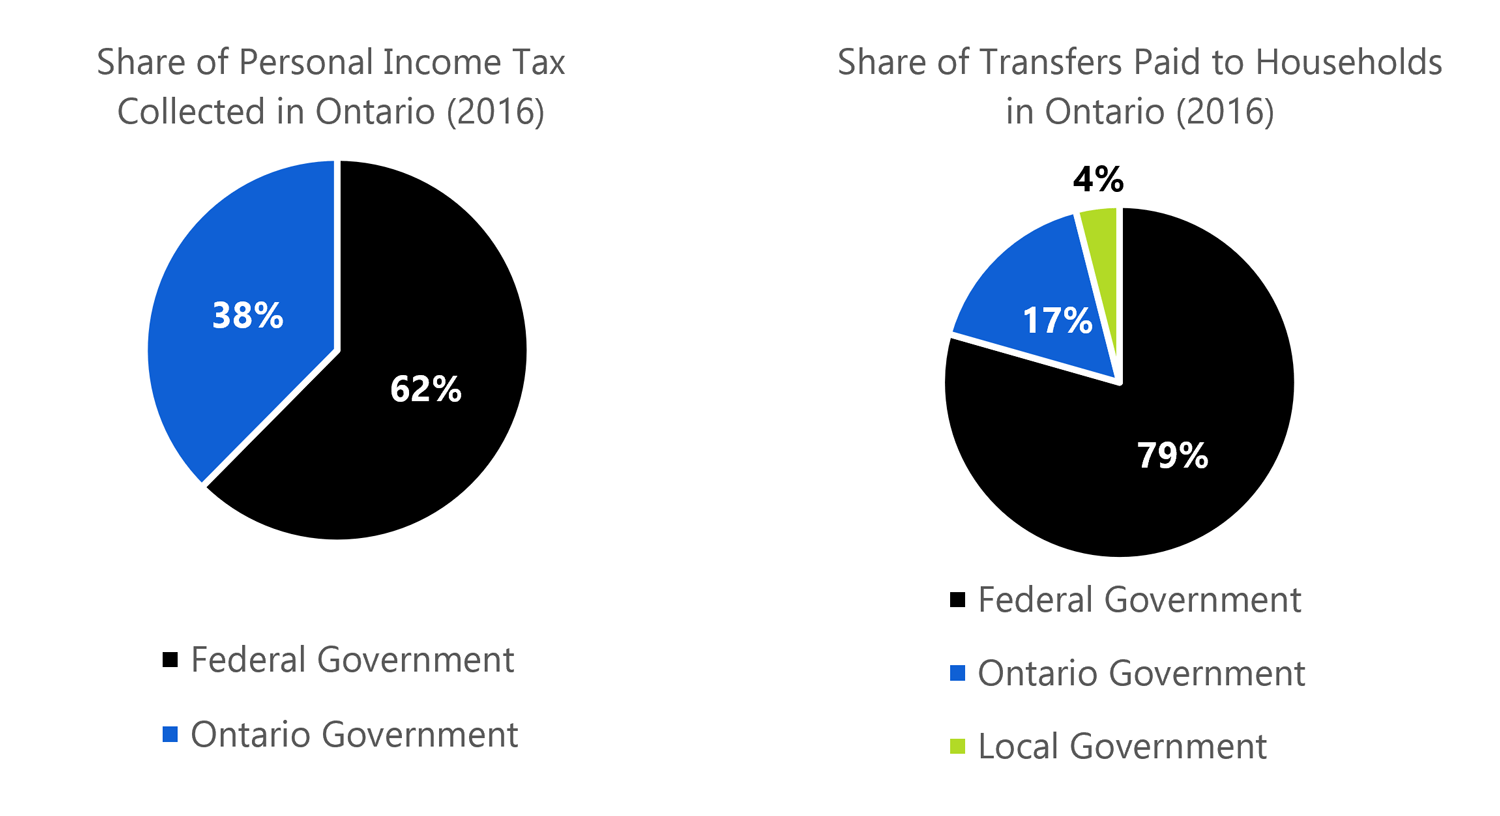 1.5 Ontario Government plays a smaller, but key role in the tax and transfer system